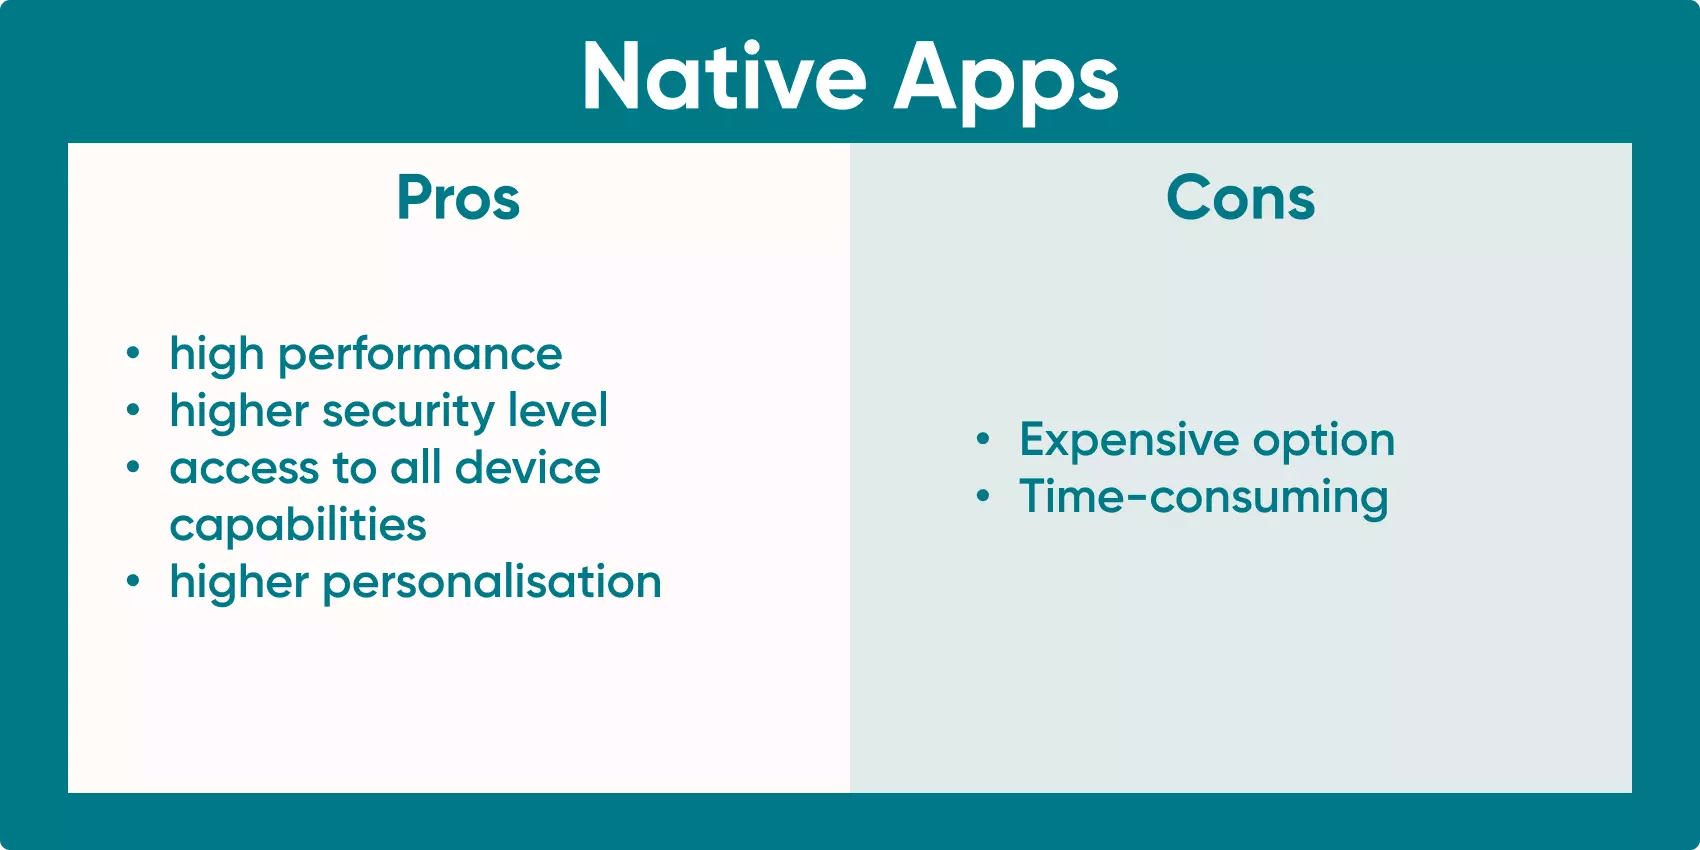 Discover the the pros and cons of native appa. What is good and what is bad? 